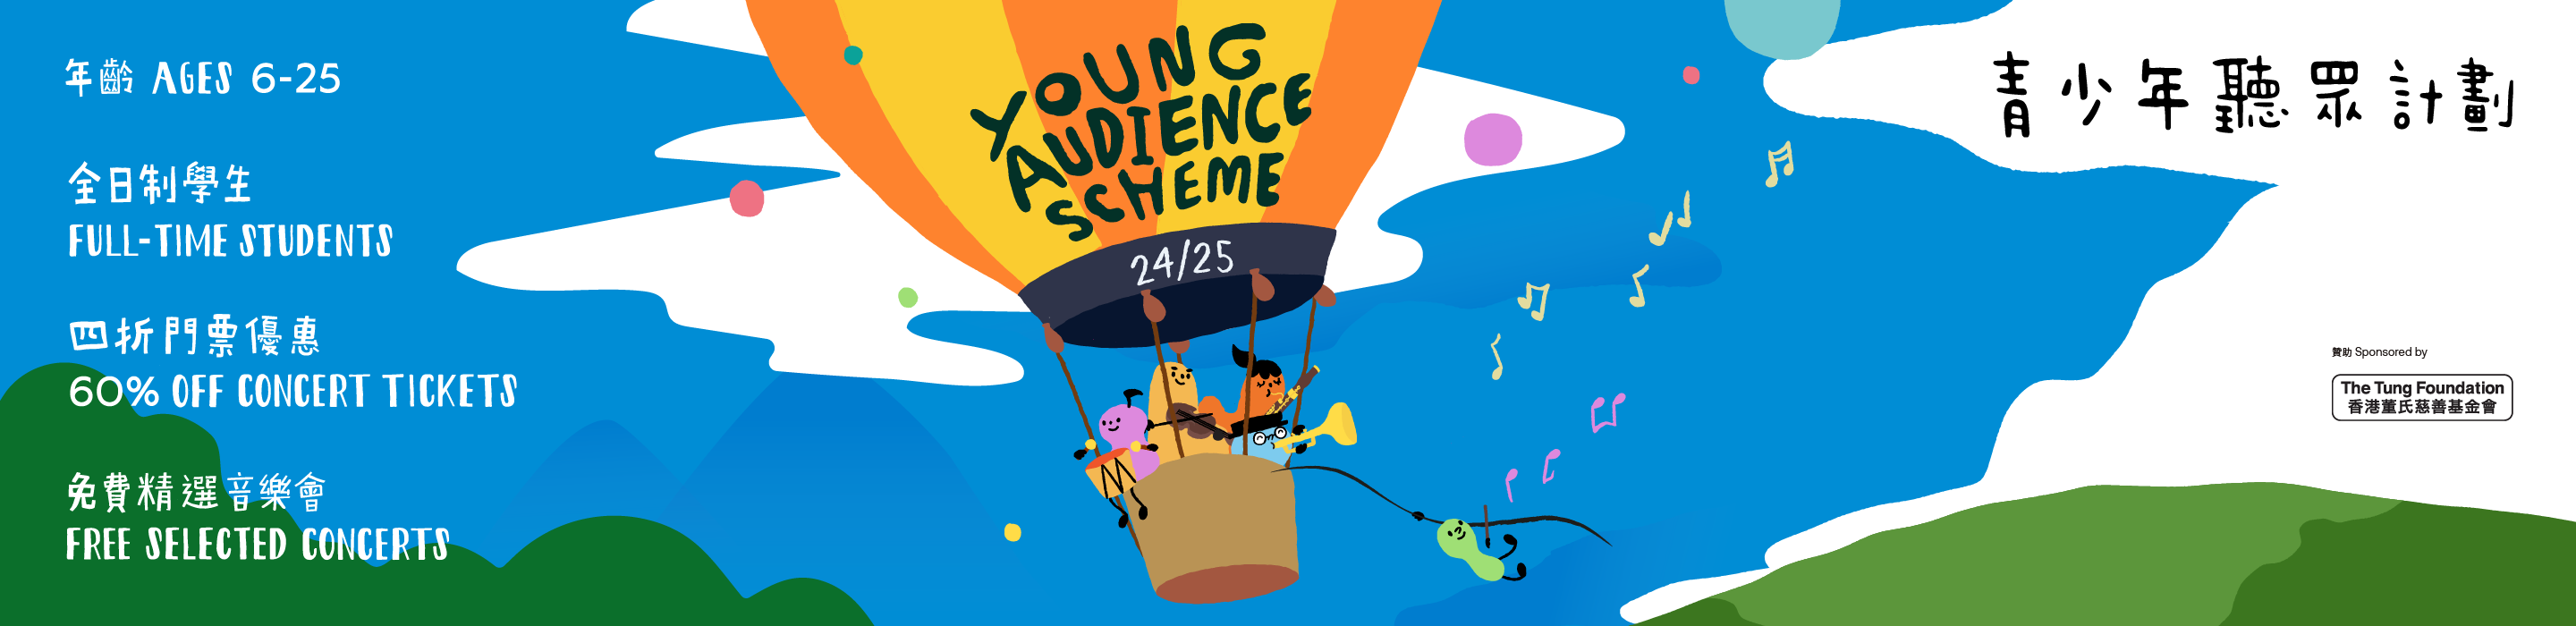 Yuong Audience Scheme 2024/25. The five Y A Buddies are riding on a hot air balloon while playing musical instruments.